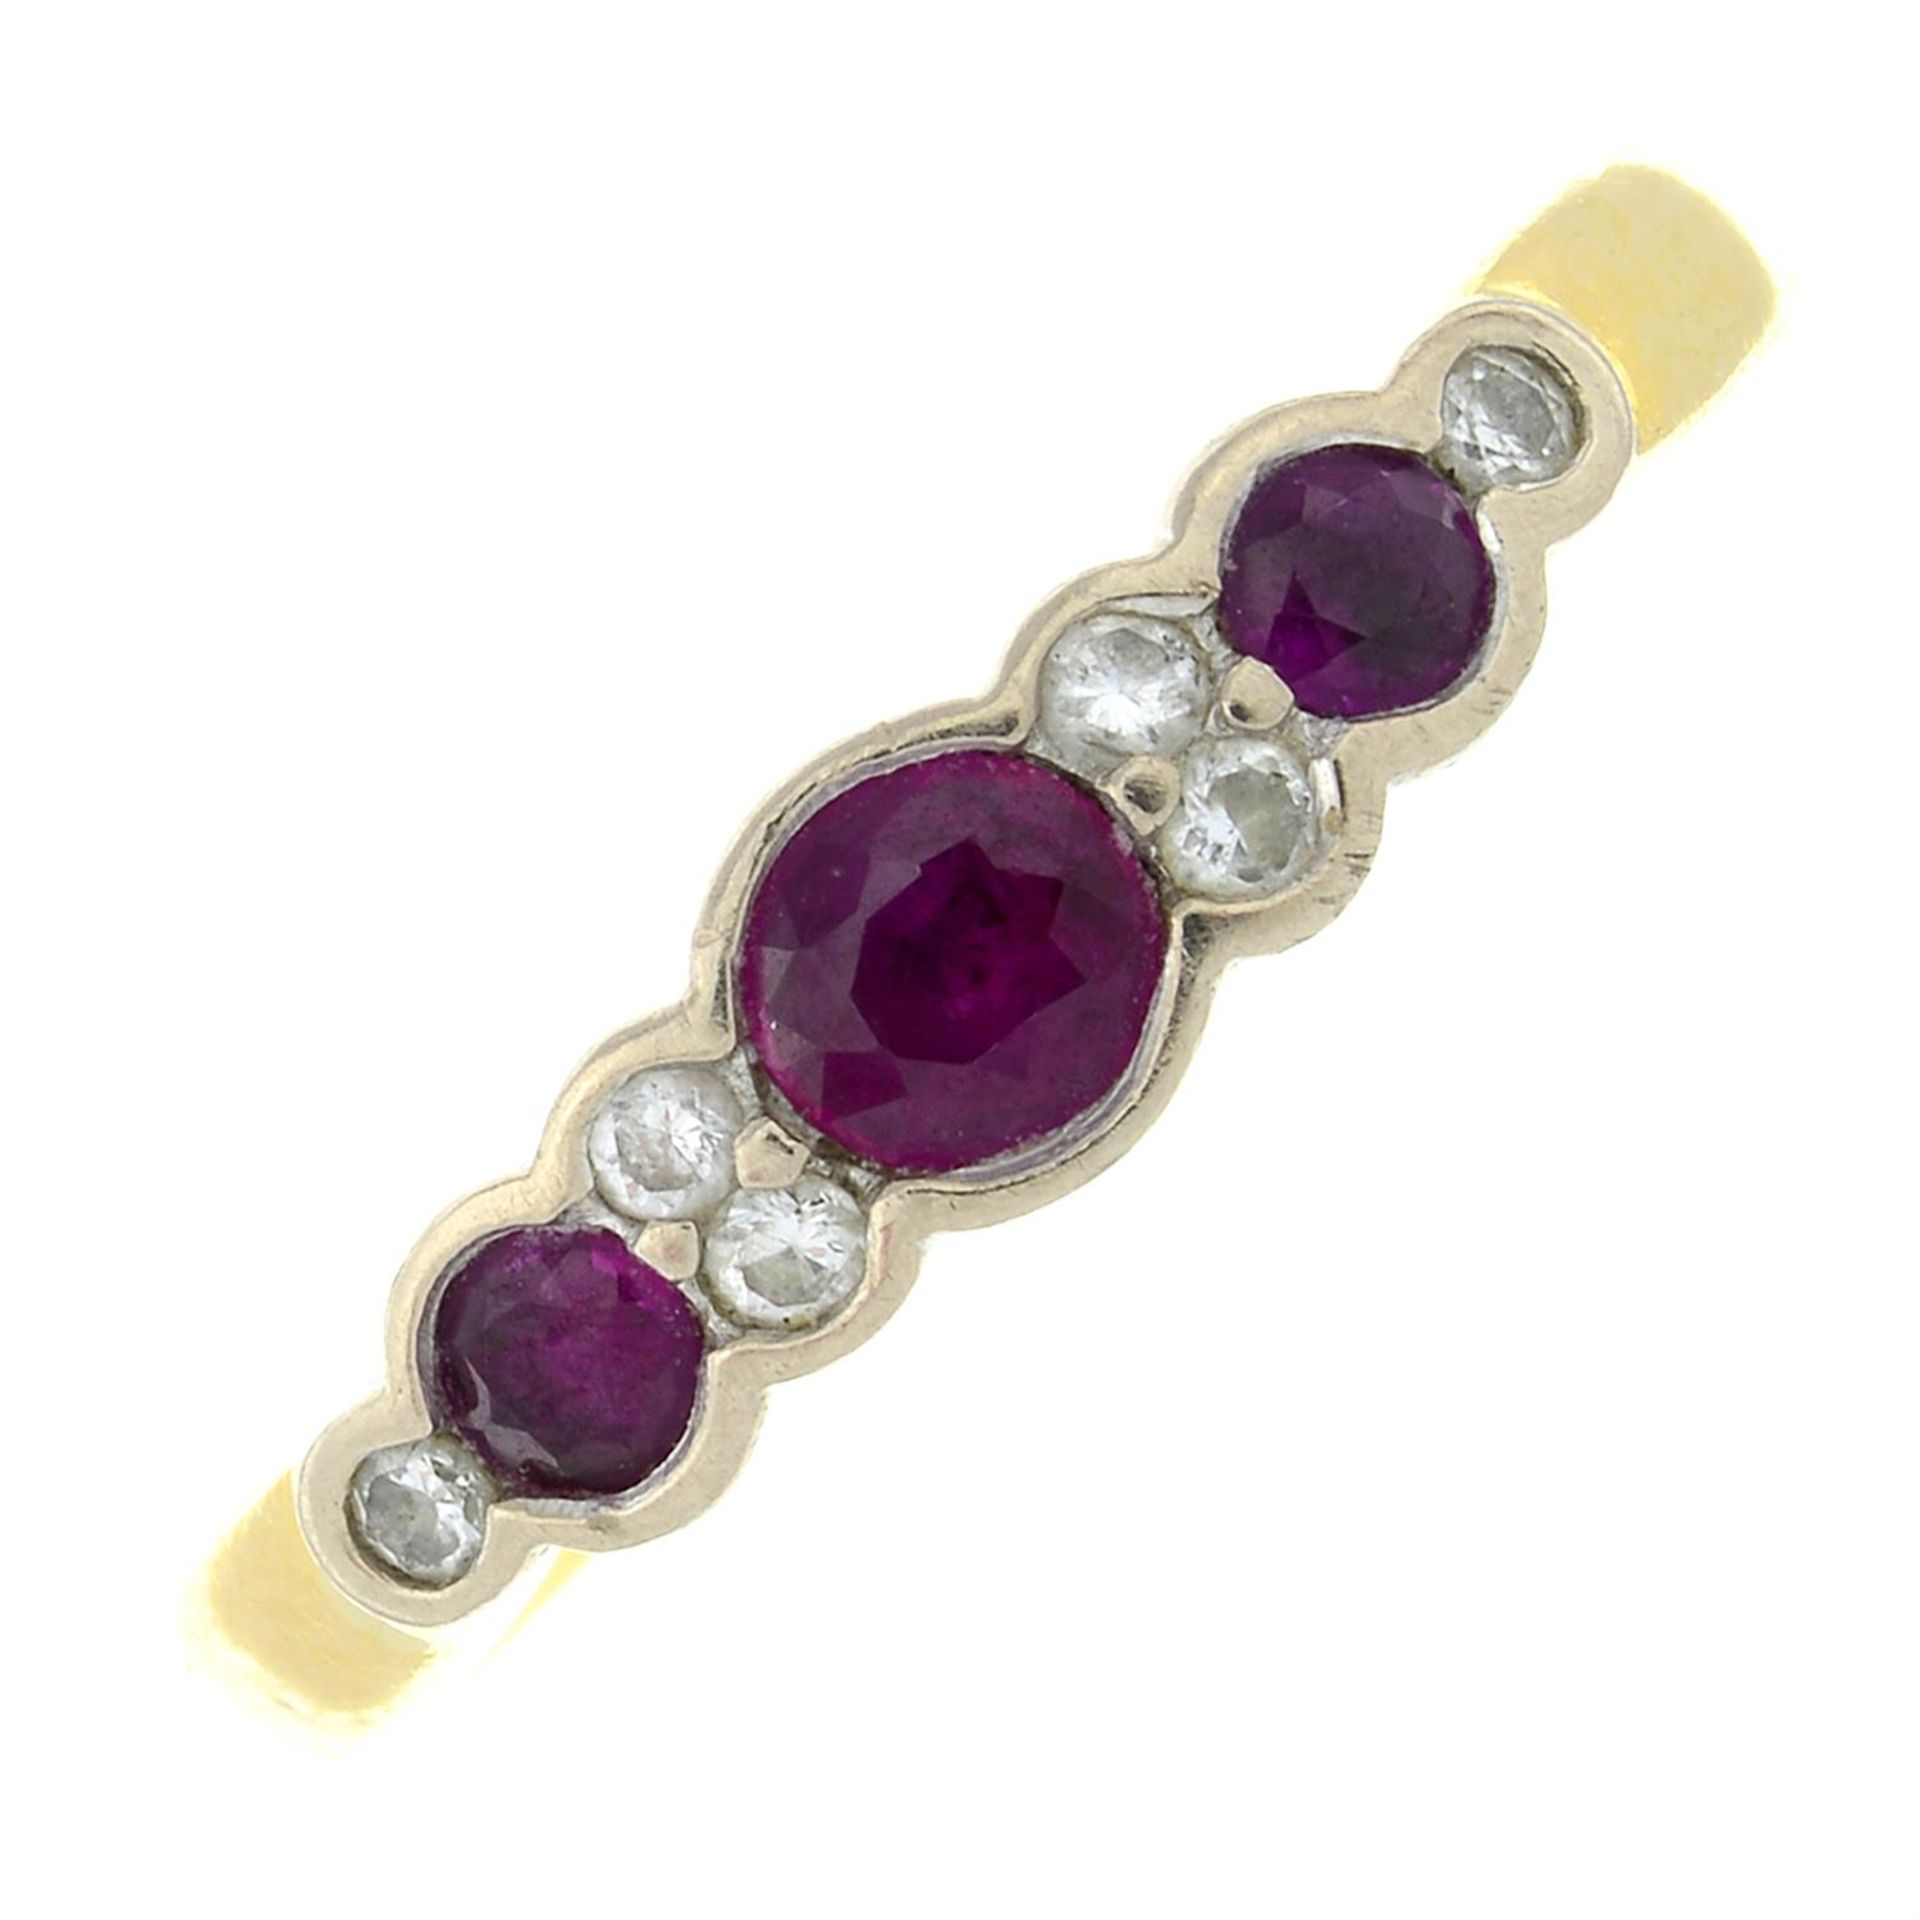 An 18ct gold ruby three-stone ring, with brilliant-cut diamond spacers.